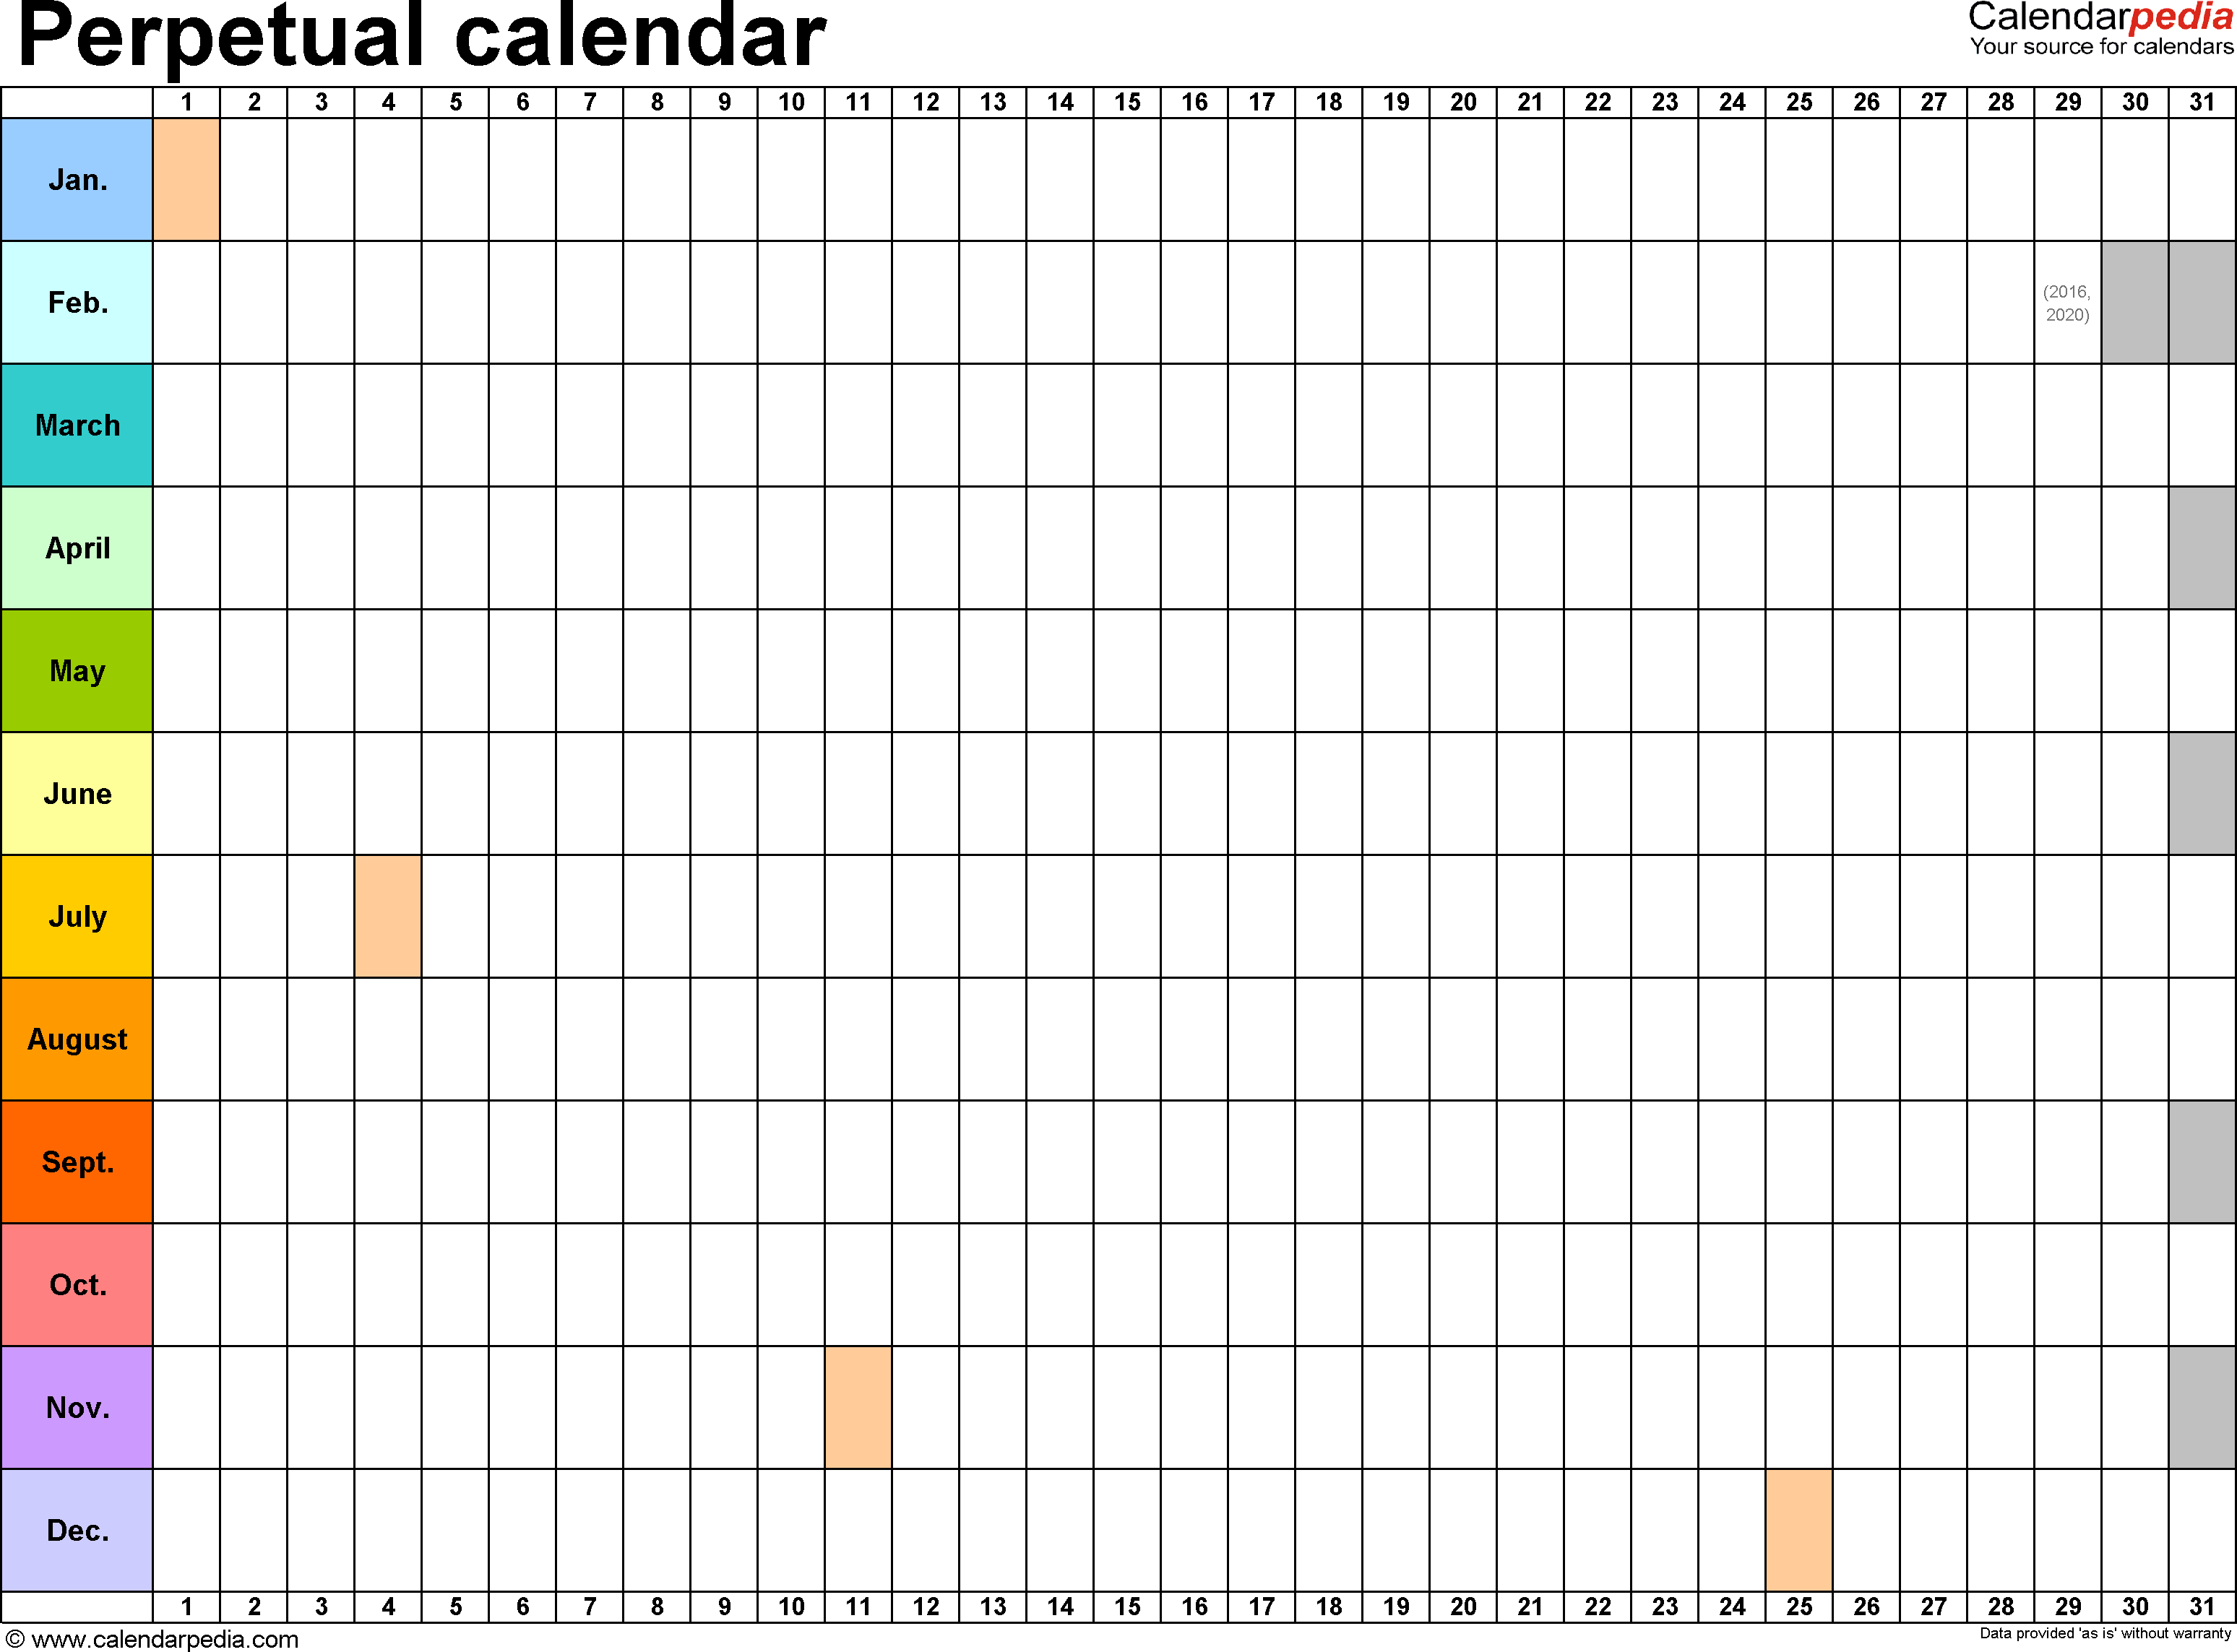 Monthly Calendar Spreadsheet pertaining to Perpetual Calendars  7 Free Printable Word Templates